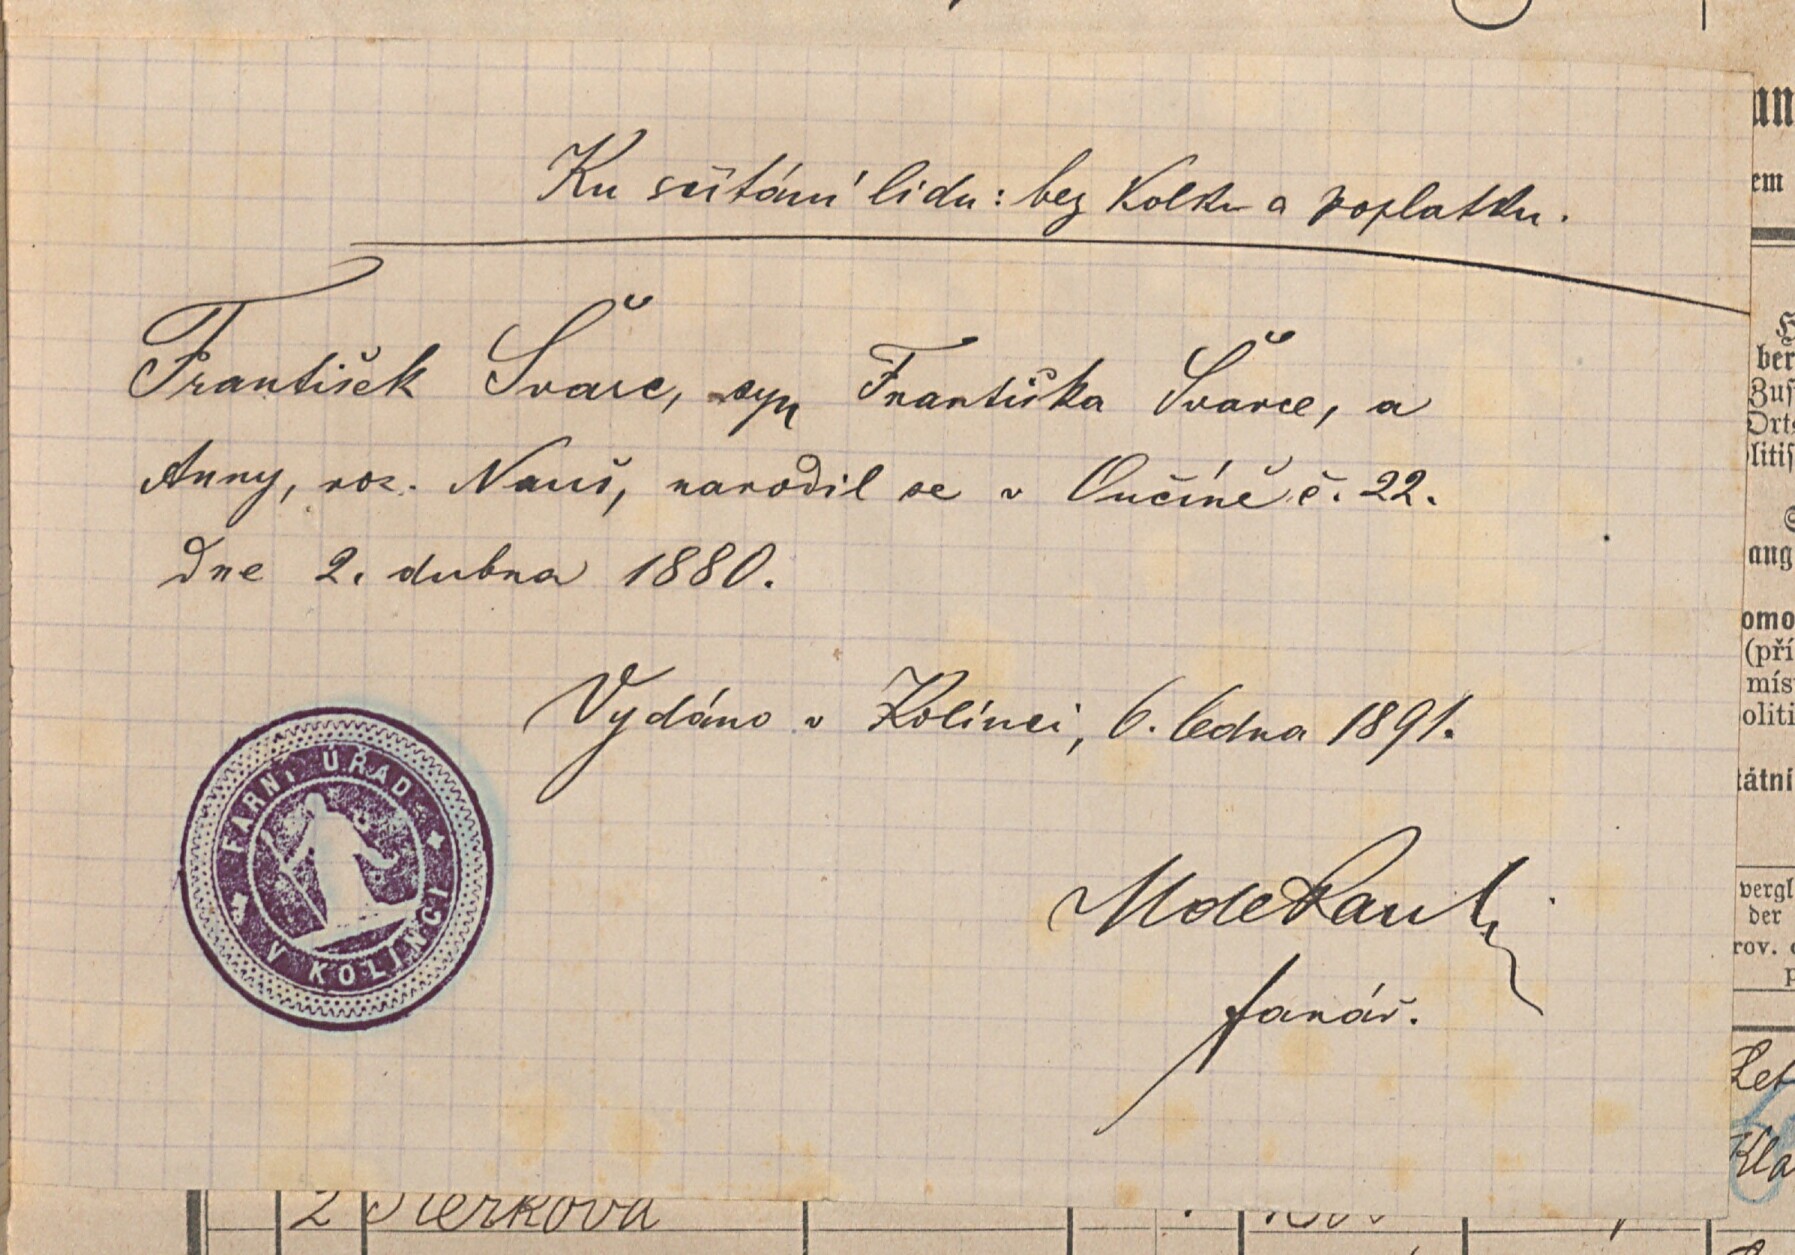 6. soap-kt_01159_census-1890-neprochovy-cp001_0060